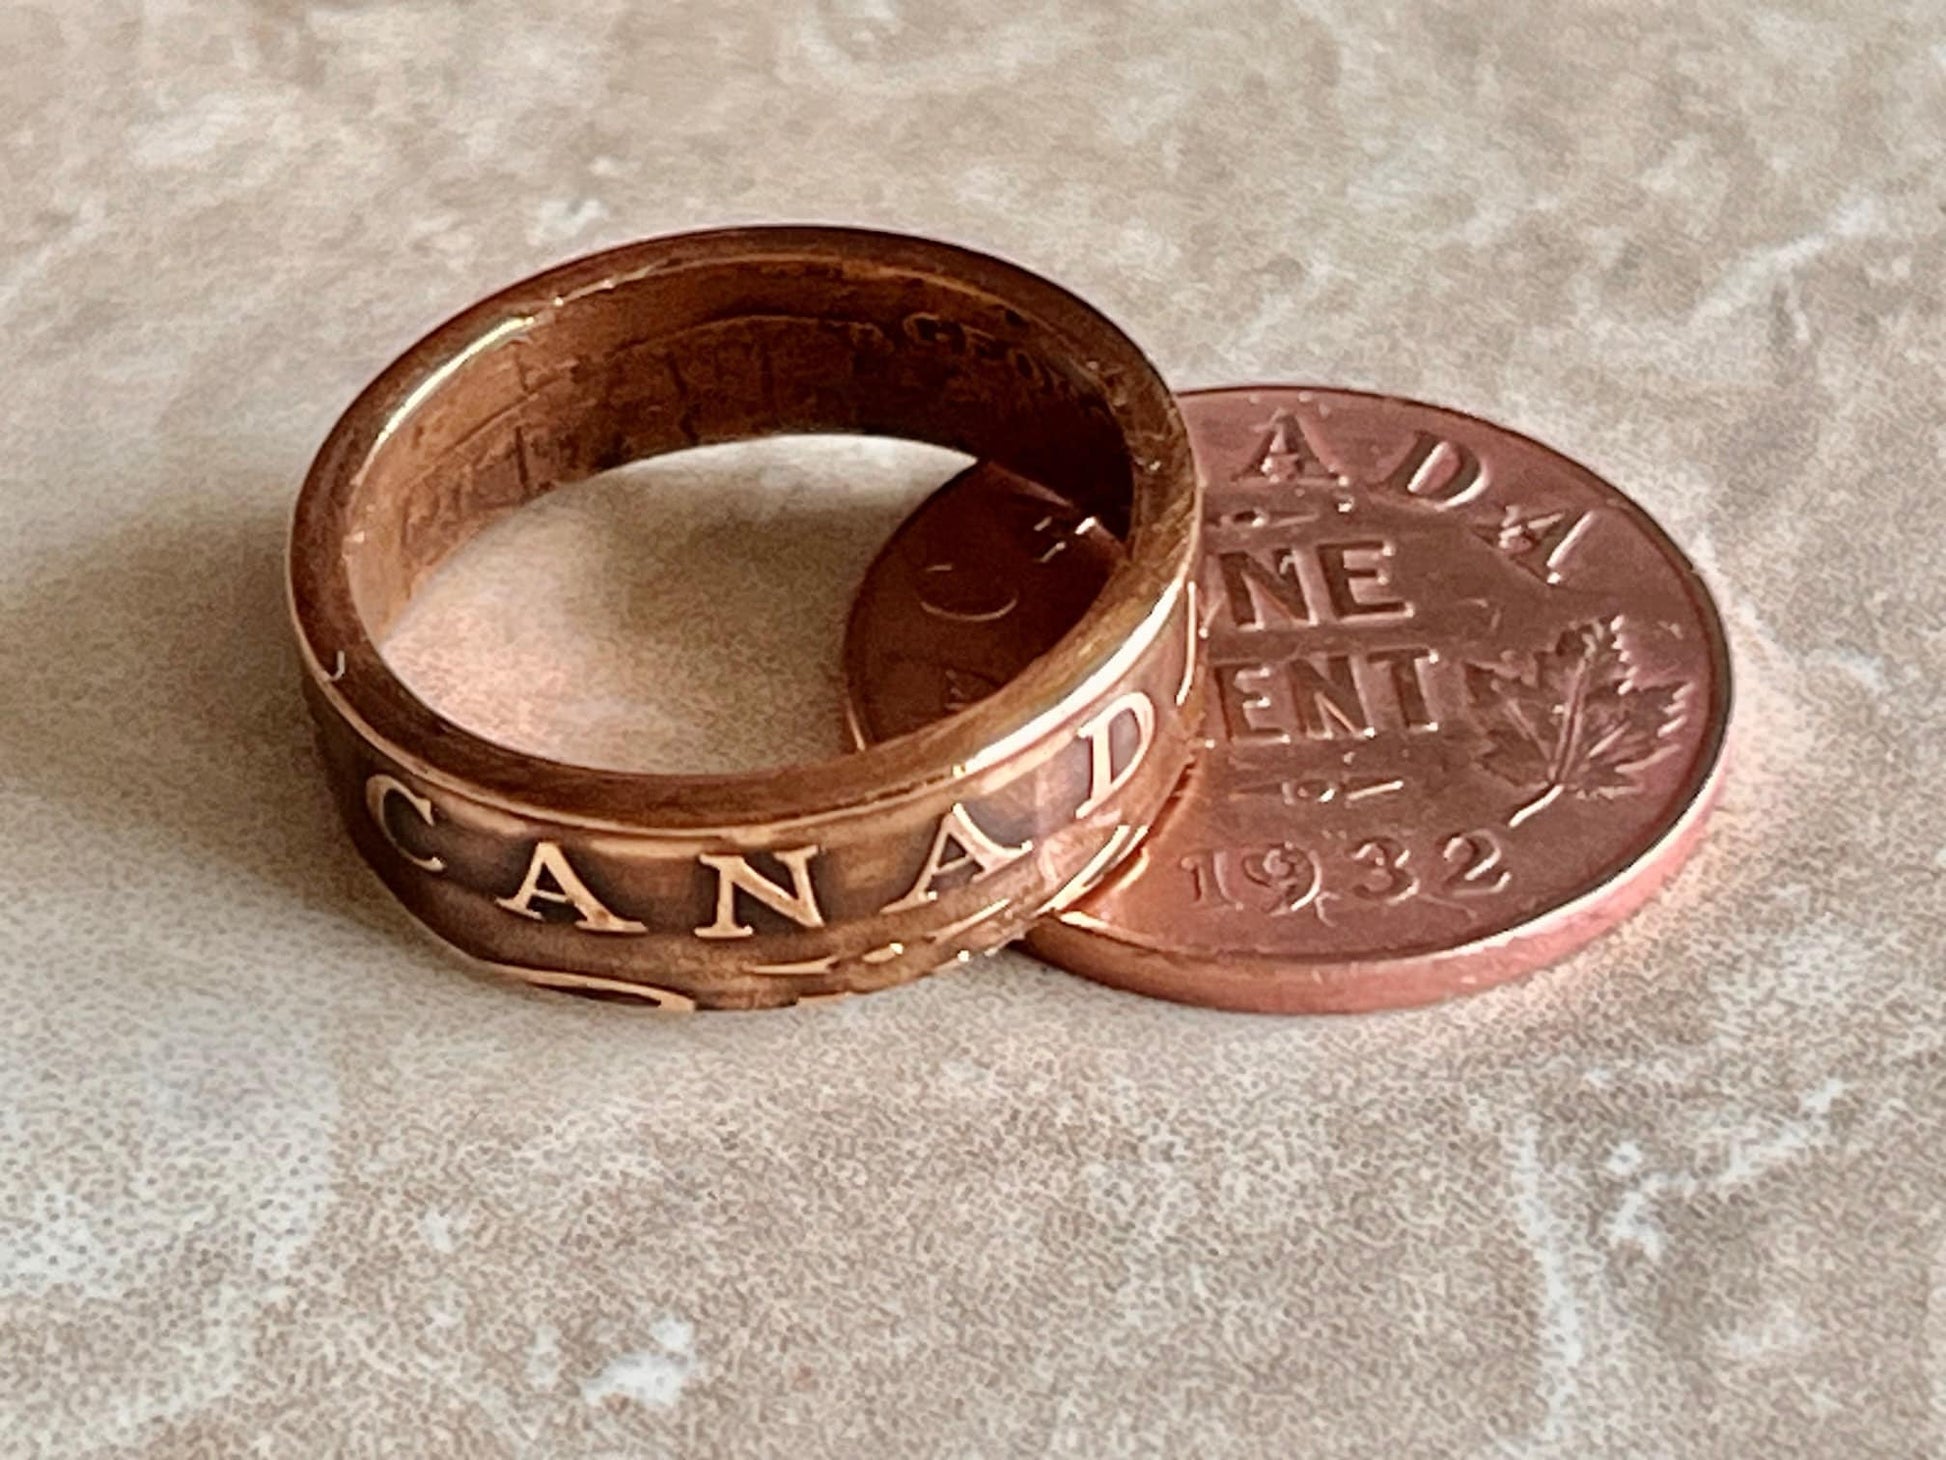 Canada Coin Ring Penny Canadian Maple Leaf One Cent Ring Handmade Jewelry Gift For Friend Coin Ring Gift For Him Her World Coins Collector